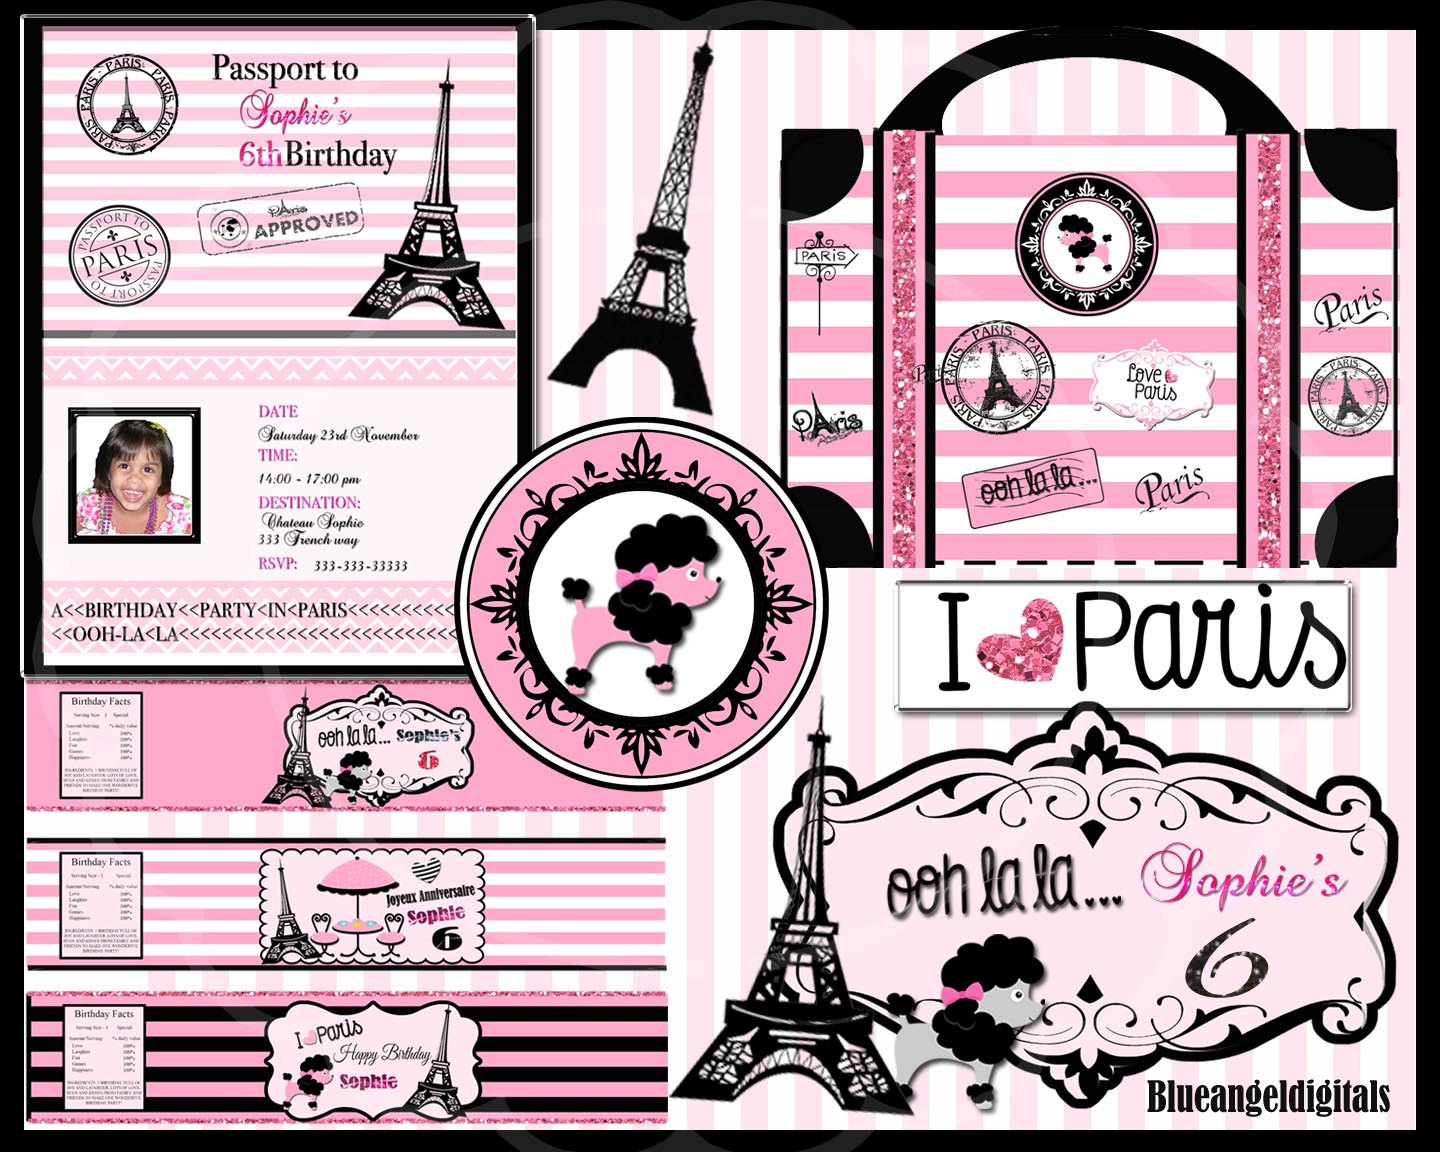 5-best-images-of-paris-themed-birthday-party-free-printables-paris